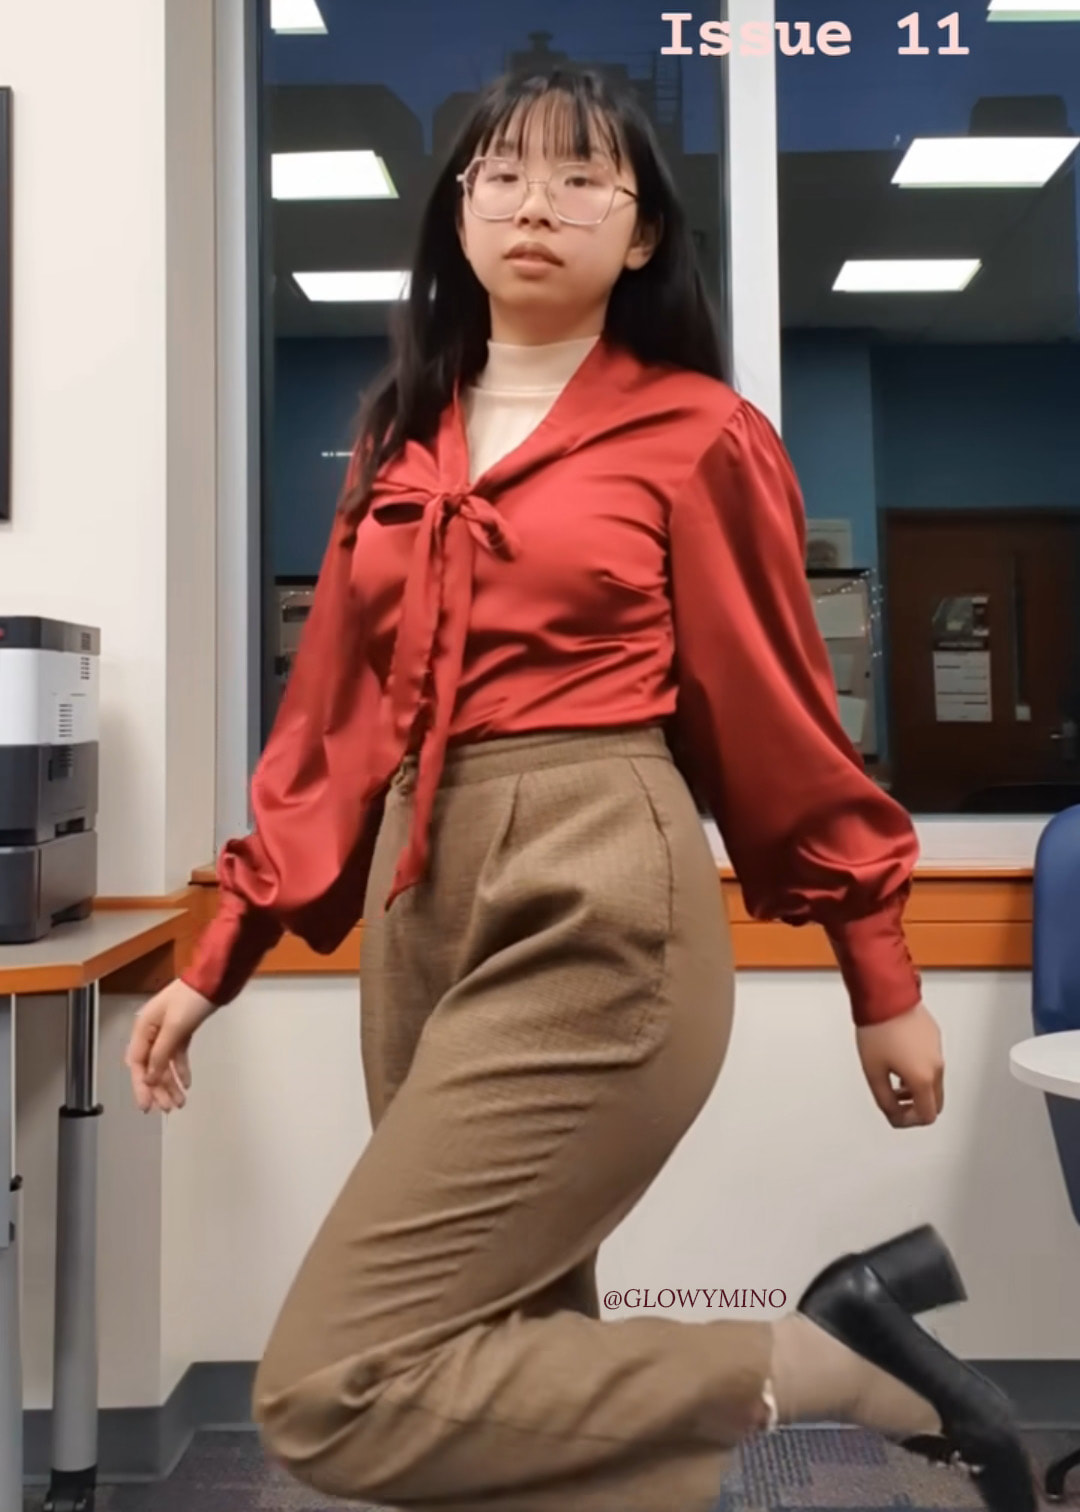 Screenshot from the Instagram Reel showing issue 11's second outfit, which was in response to the dress code 